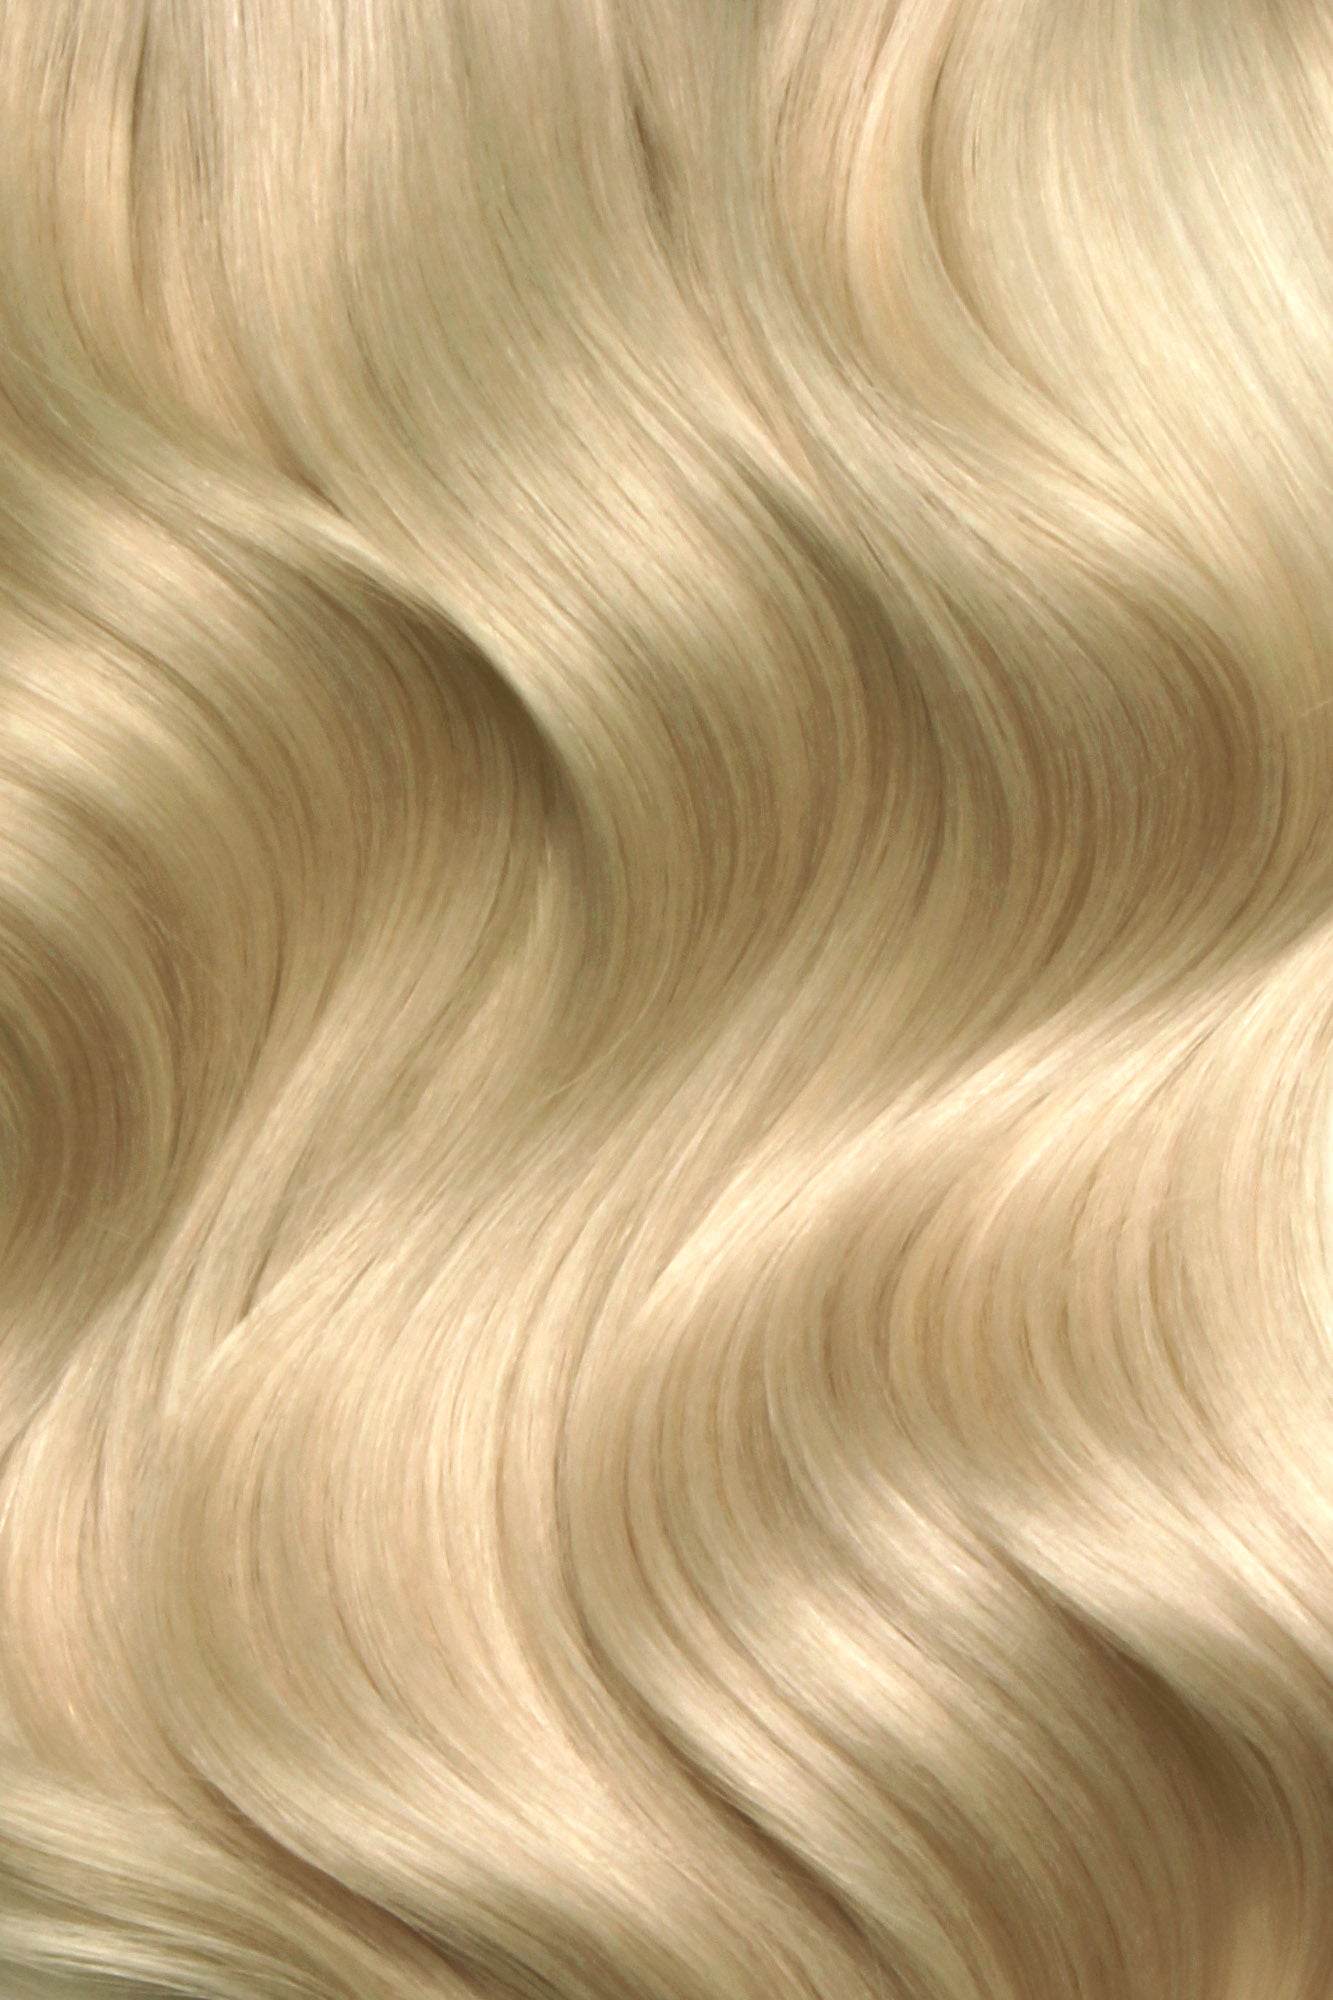 SEAMLESS® Flat Weft 20 Inches - SWAY Hair Extensions LA-Blonde-613-24 Natural SEAMLESS® Flat Weft 20 Inches extensions. Thin, flexible, and discreet. 100% Double Drawn Remy Human Hair. Versatile and reusable